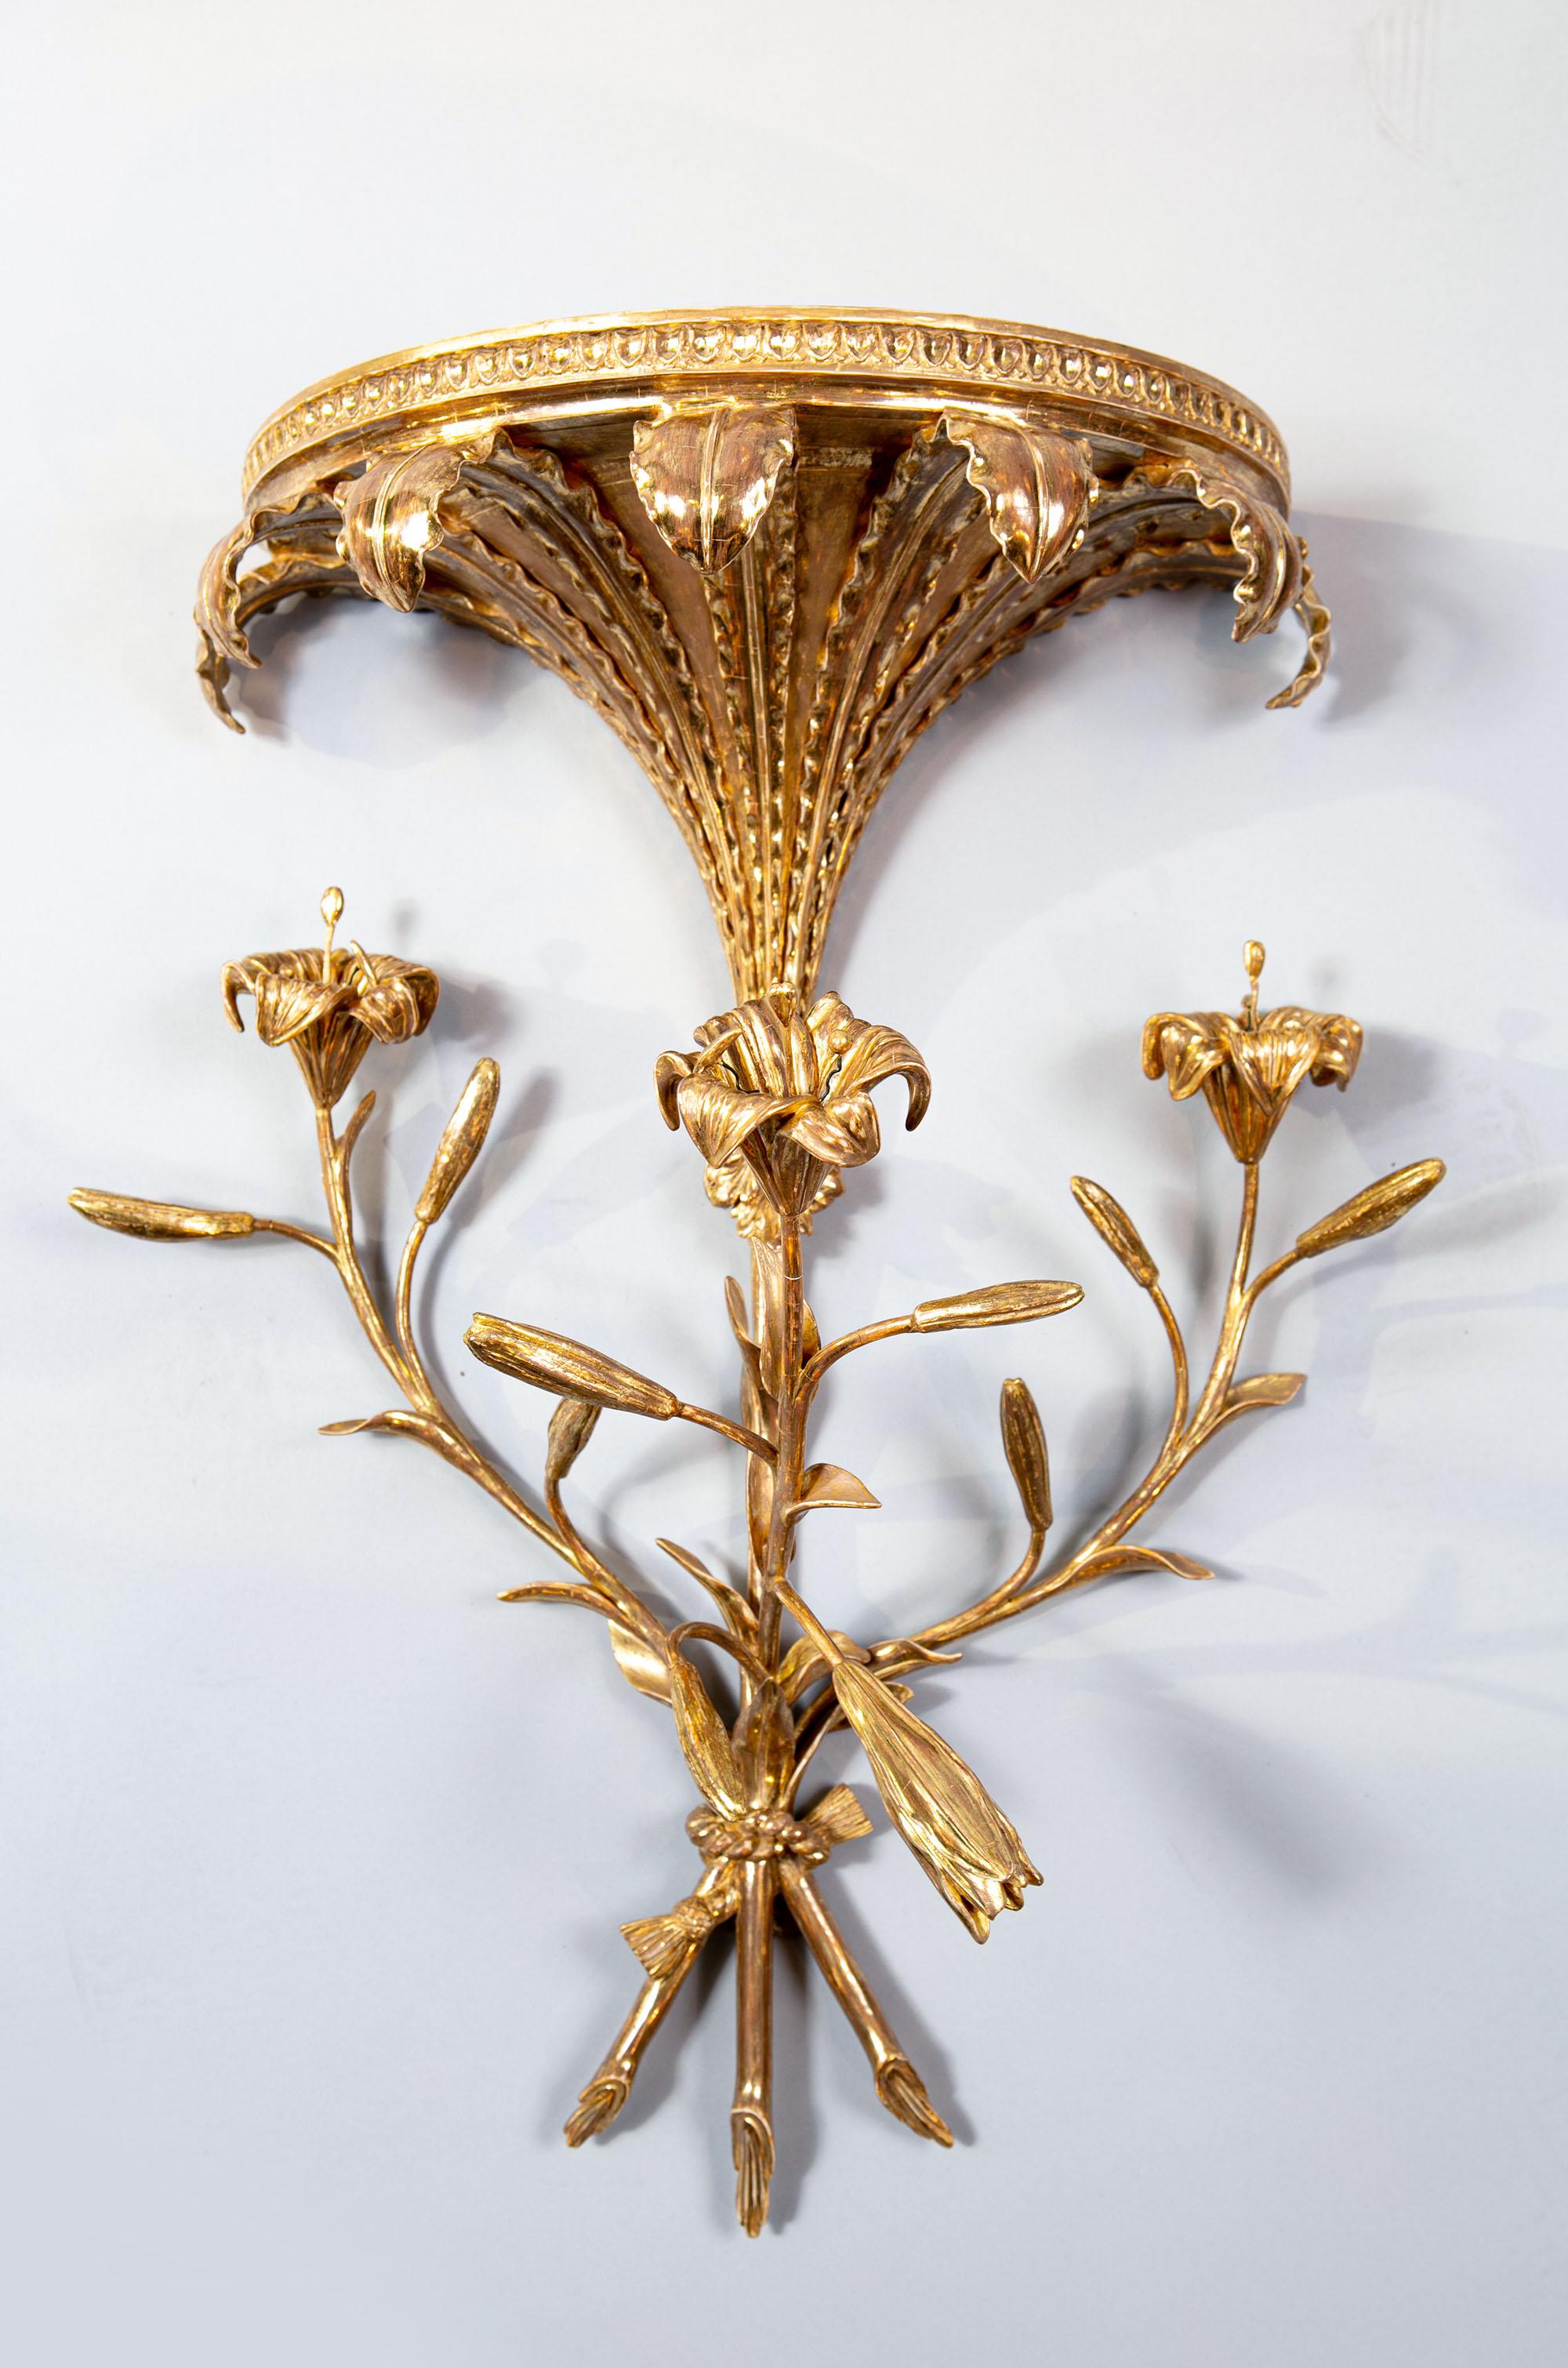 A magnificent pair of late 18th century George III giltwood wall brackets fashioned as bunches of lilies suspended below festoons of 7 leaves with rippled edges and neoclassical moulded tops.

England, circa 1780

Measures: Height 24.5 ins /